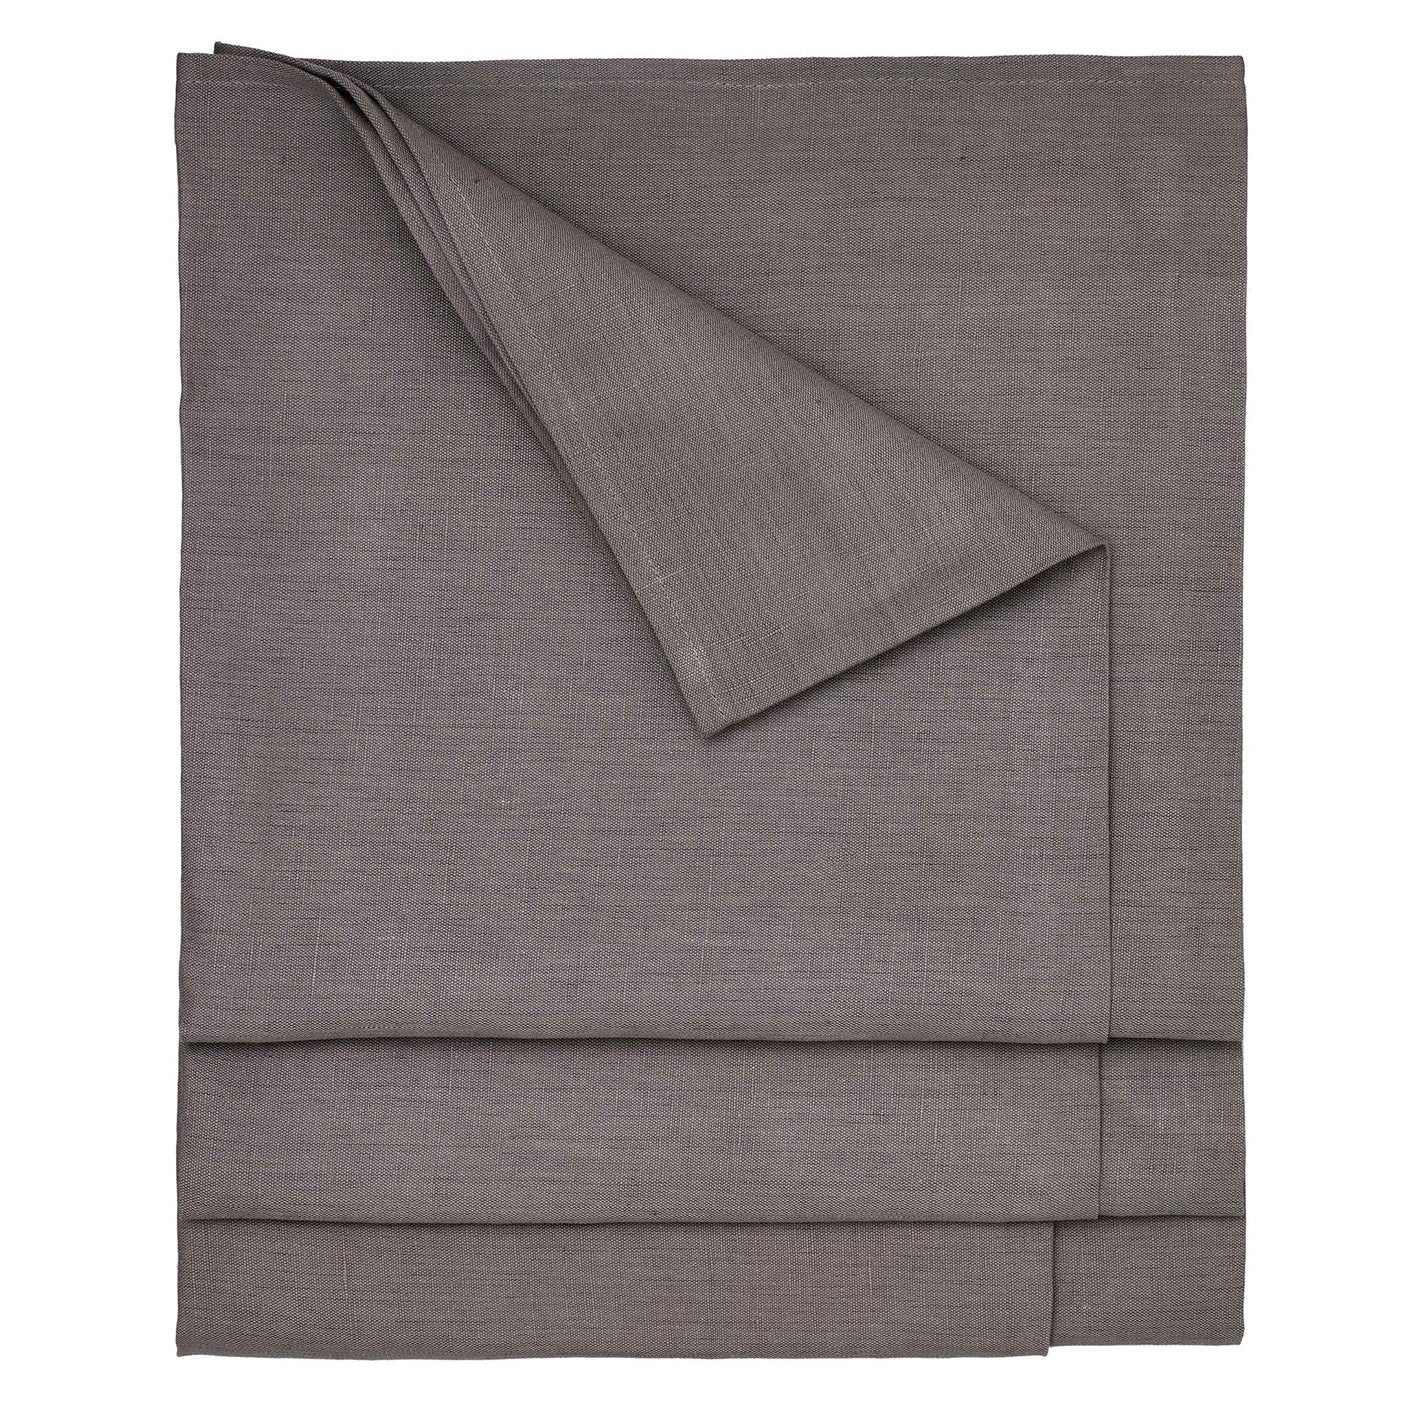 Solid Dyed Linen Cotton Union Tablecloth in Stone Grey Made in Canada 